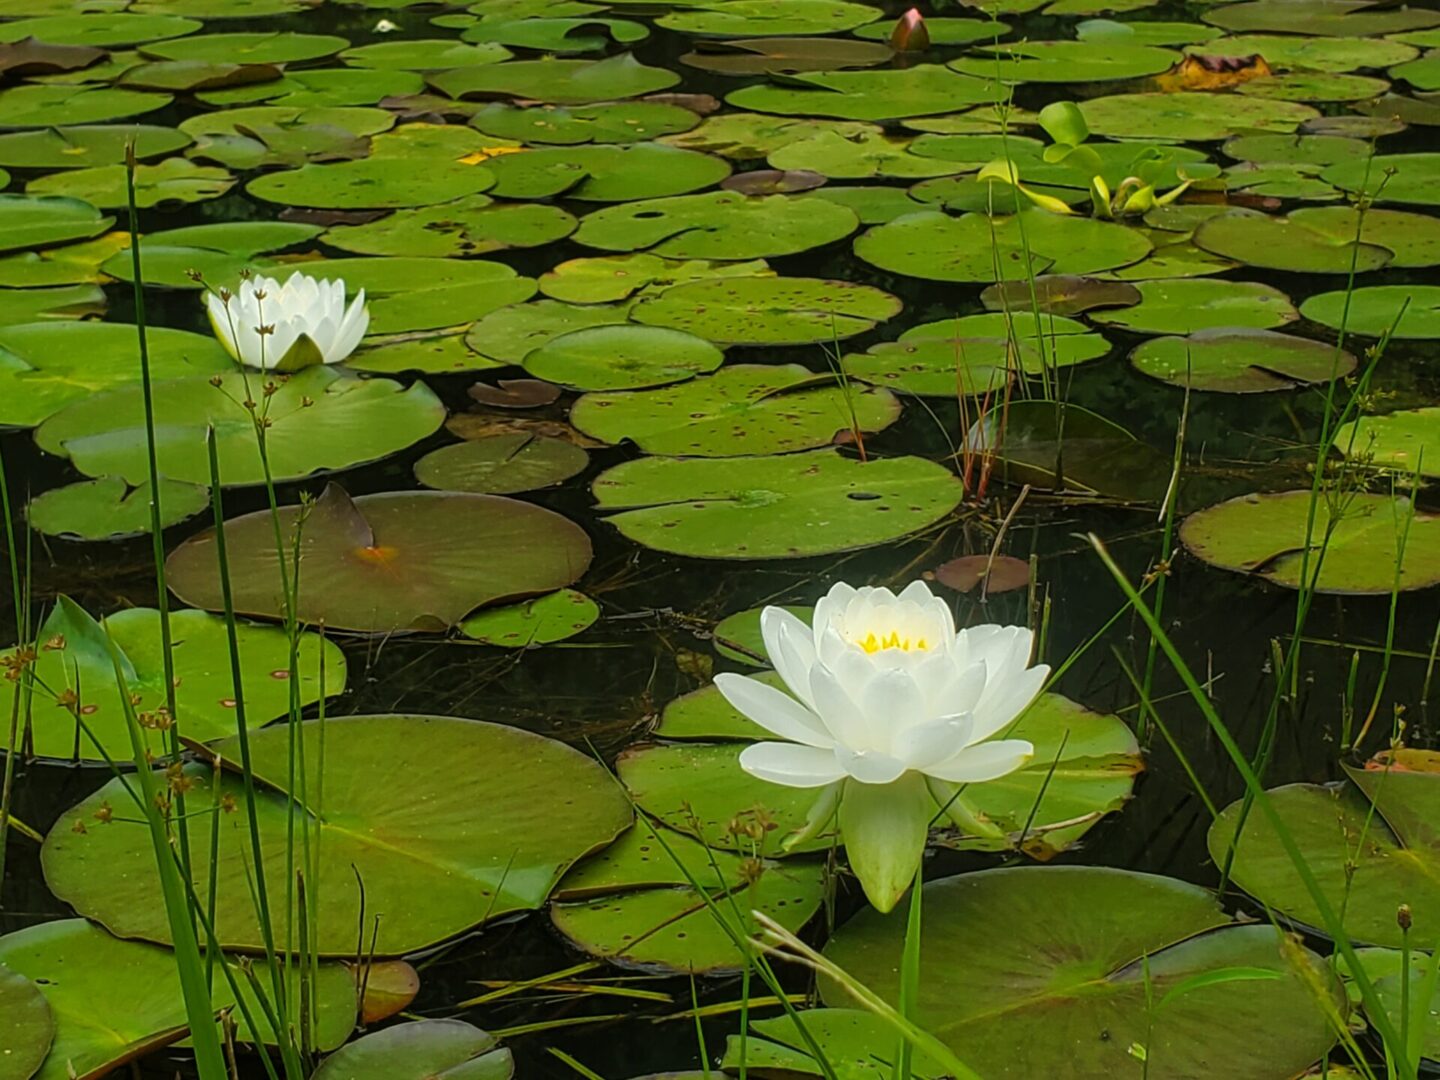 A pond with water lilies and grass in it.